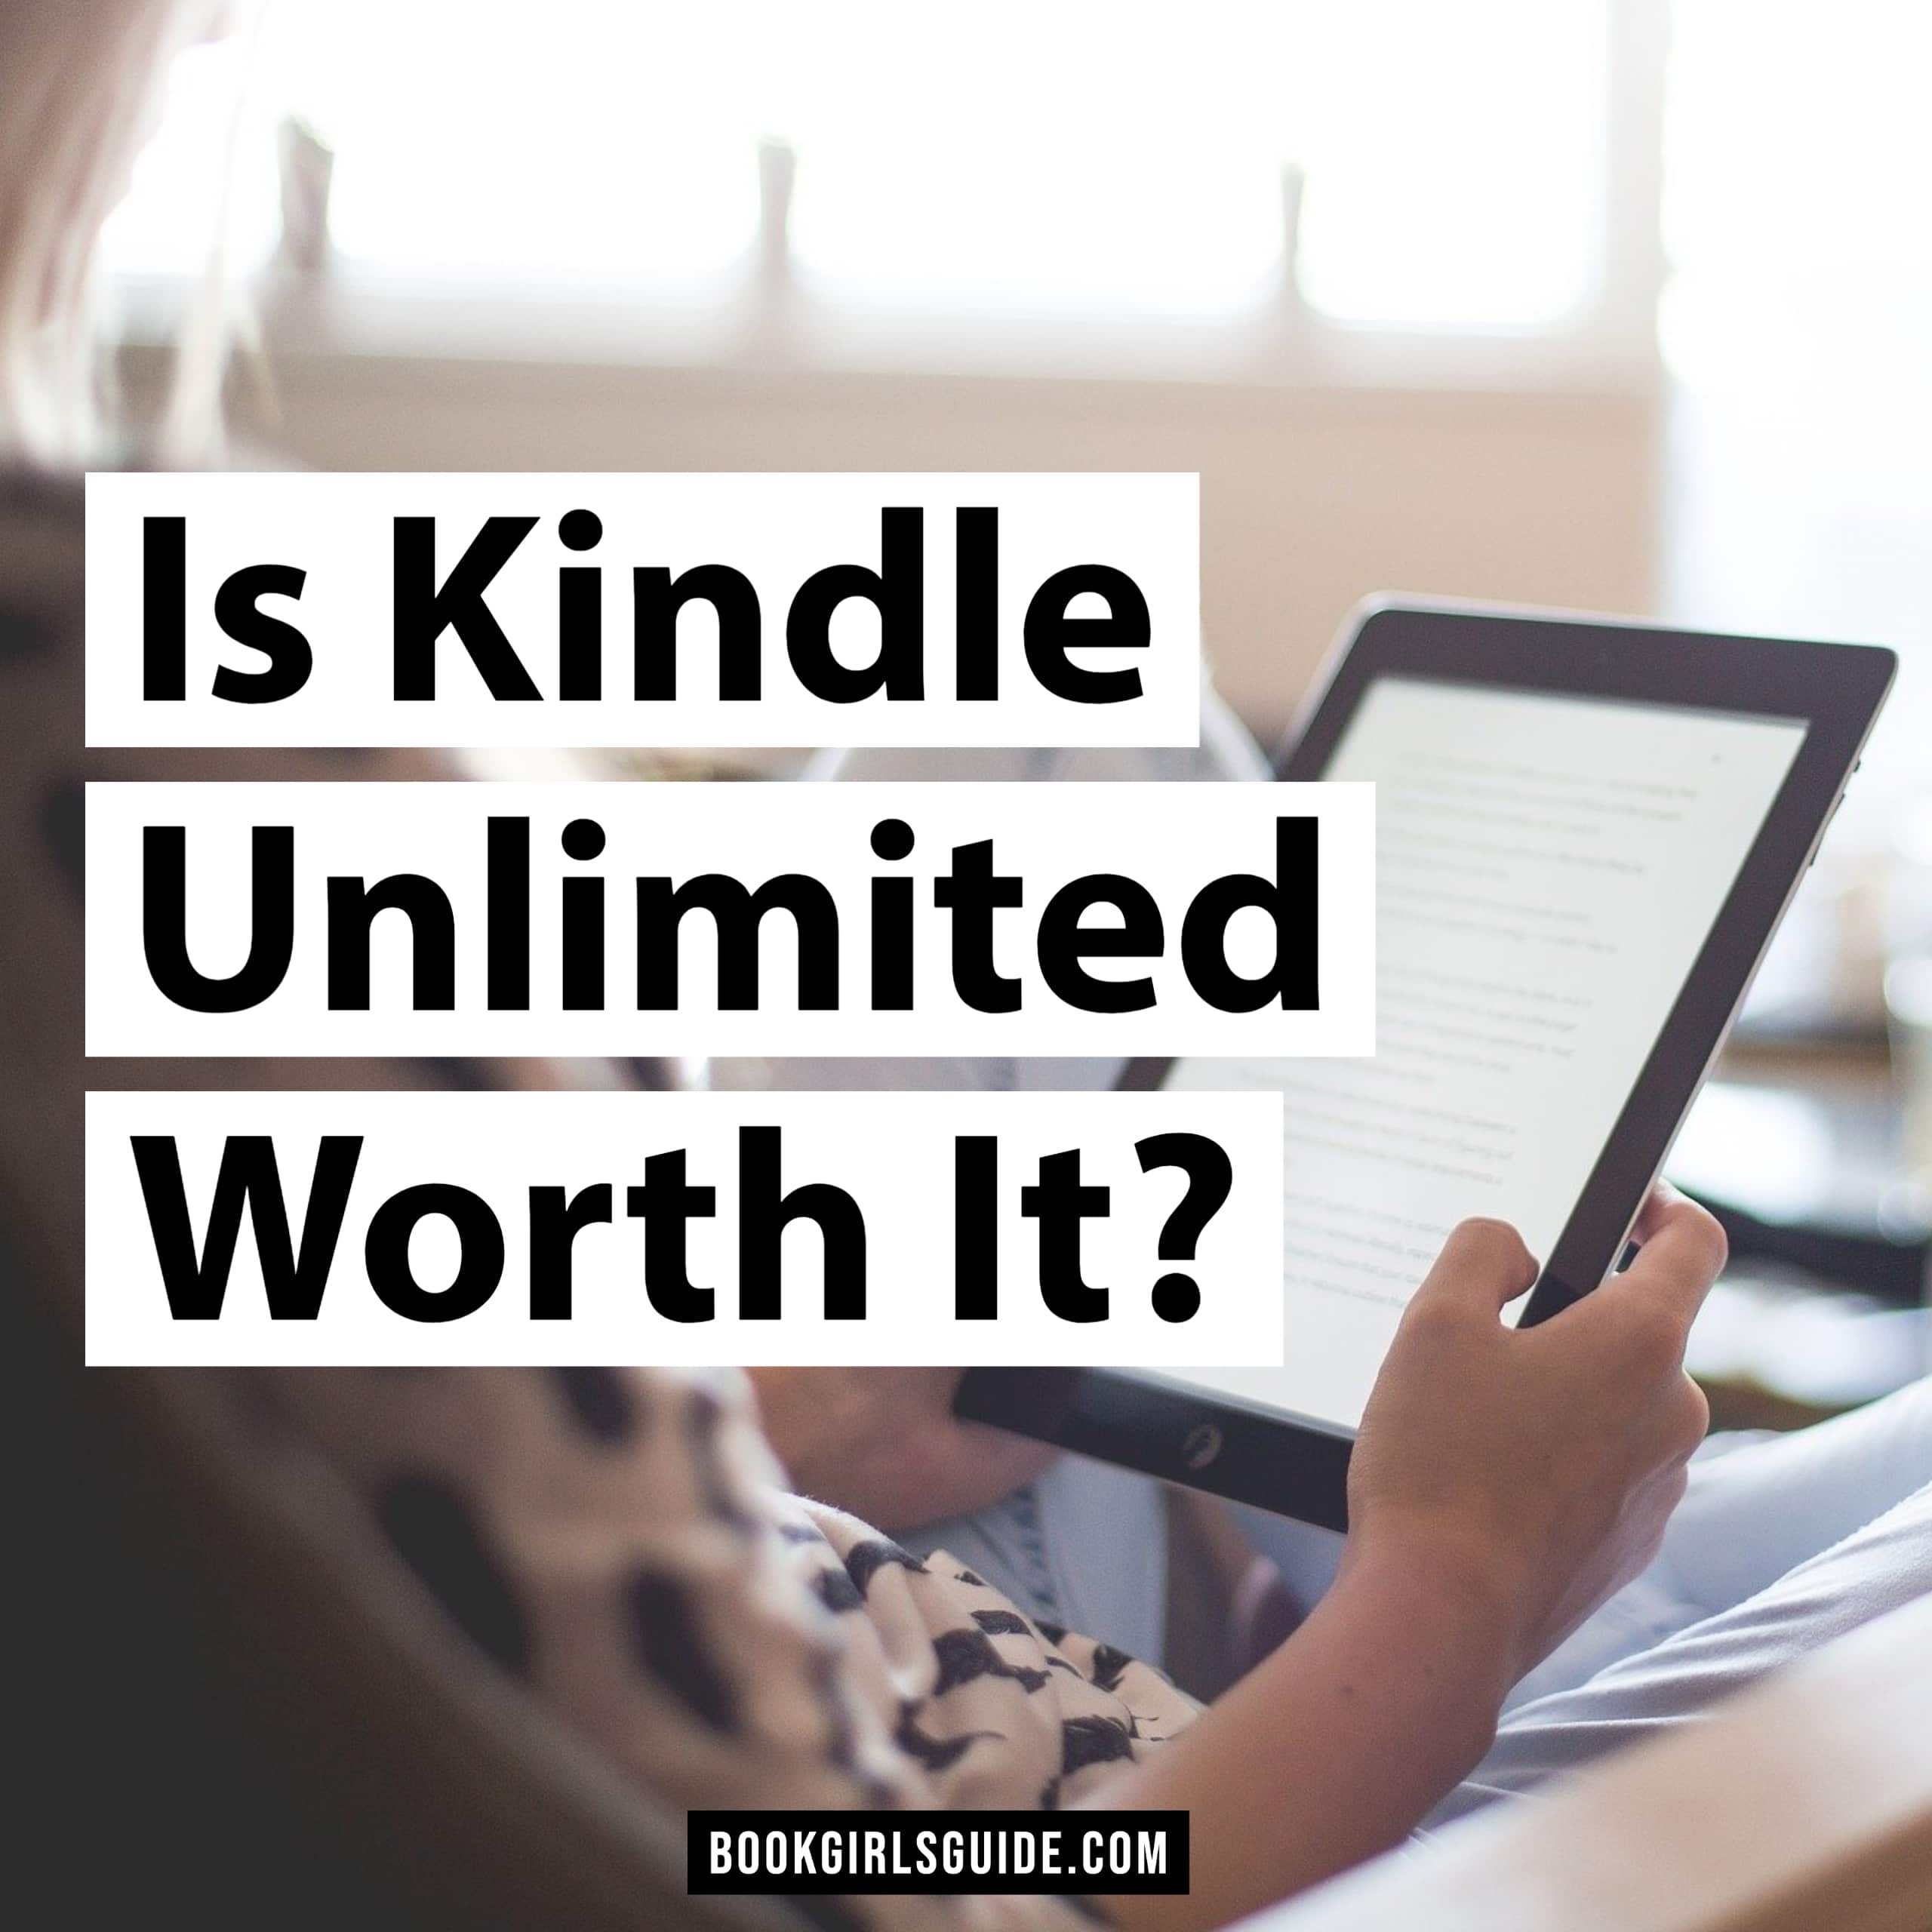 Is Kindle Unlimited Worth It? - Text over image of reading on ipad